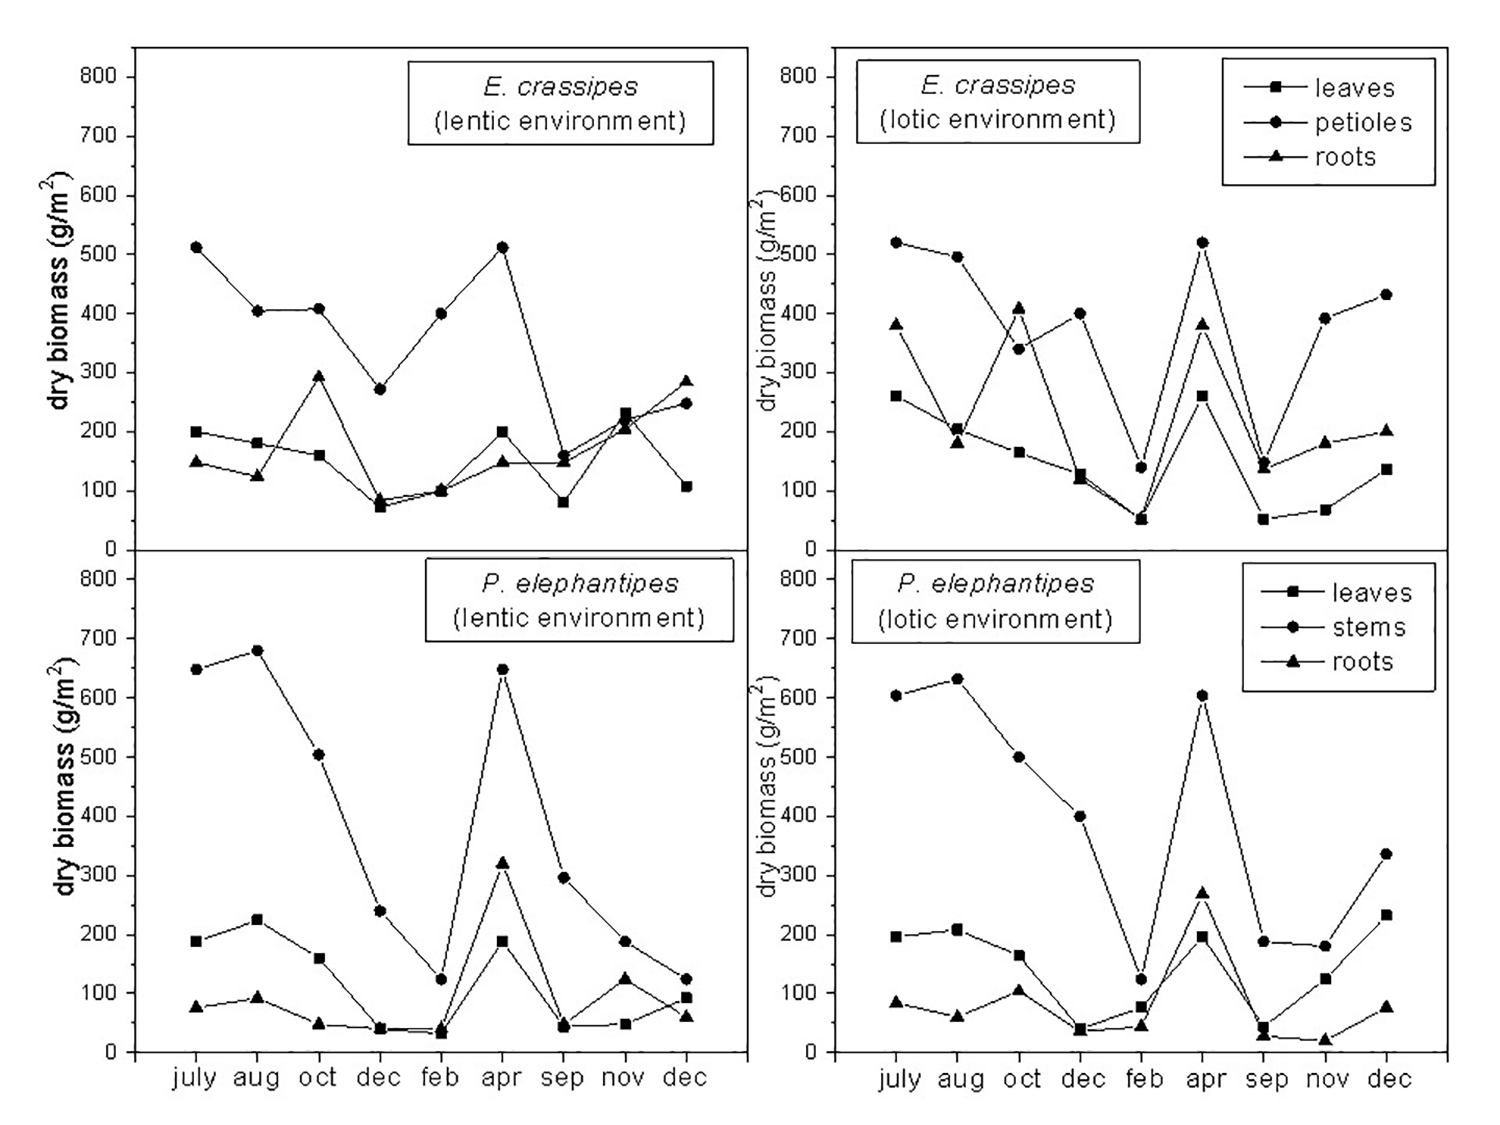 Dry biomass (g/m2) measured in E. crassipes and P. elephantipes during the study